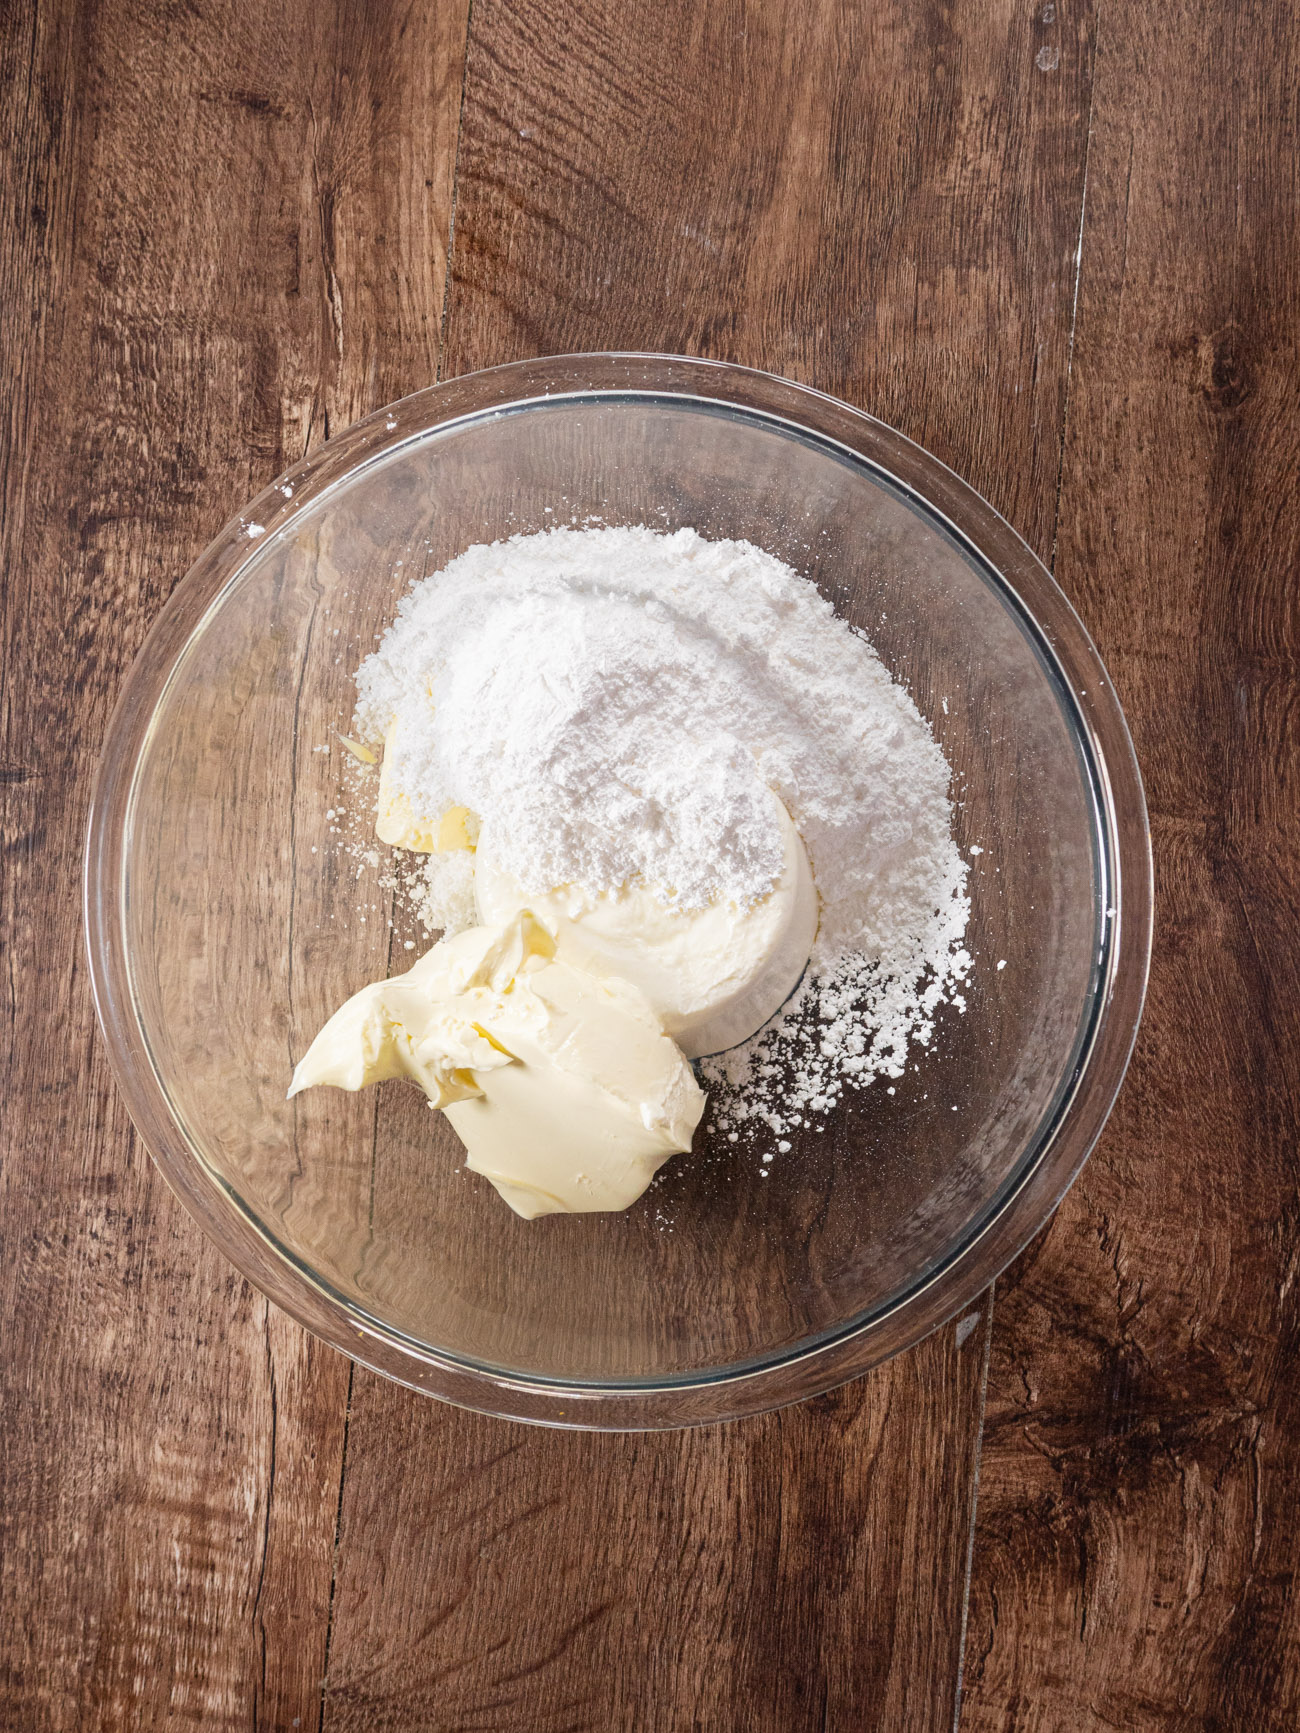 In a large mixing bowl, combine ricotta, mascarpone, and powdered sugar. Beat with an electric mixer until smooth.